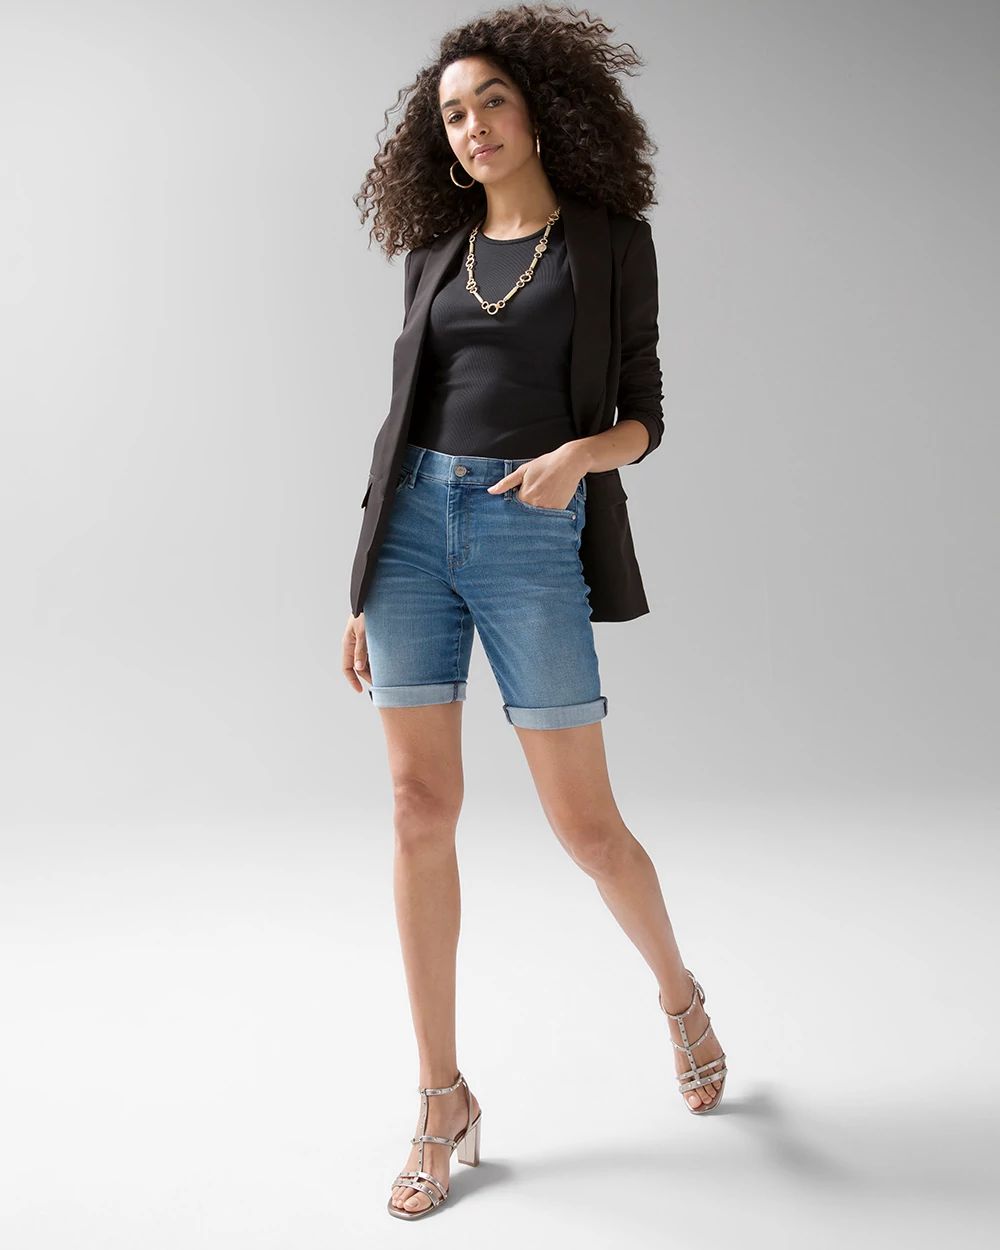 Mid-Rise Everyday Soft Denim  Bermuda Shorts click to view larger image.